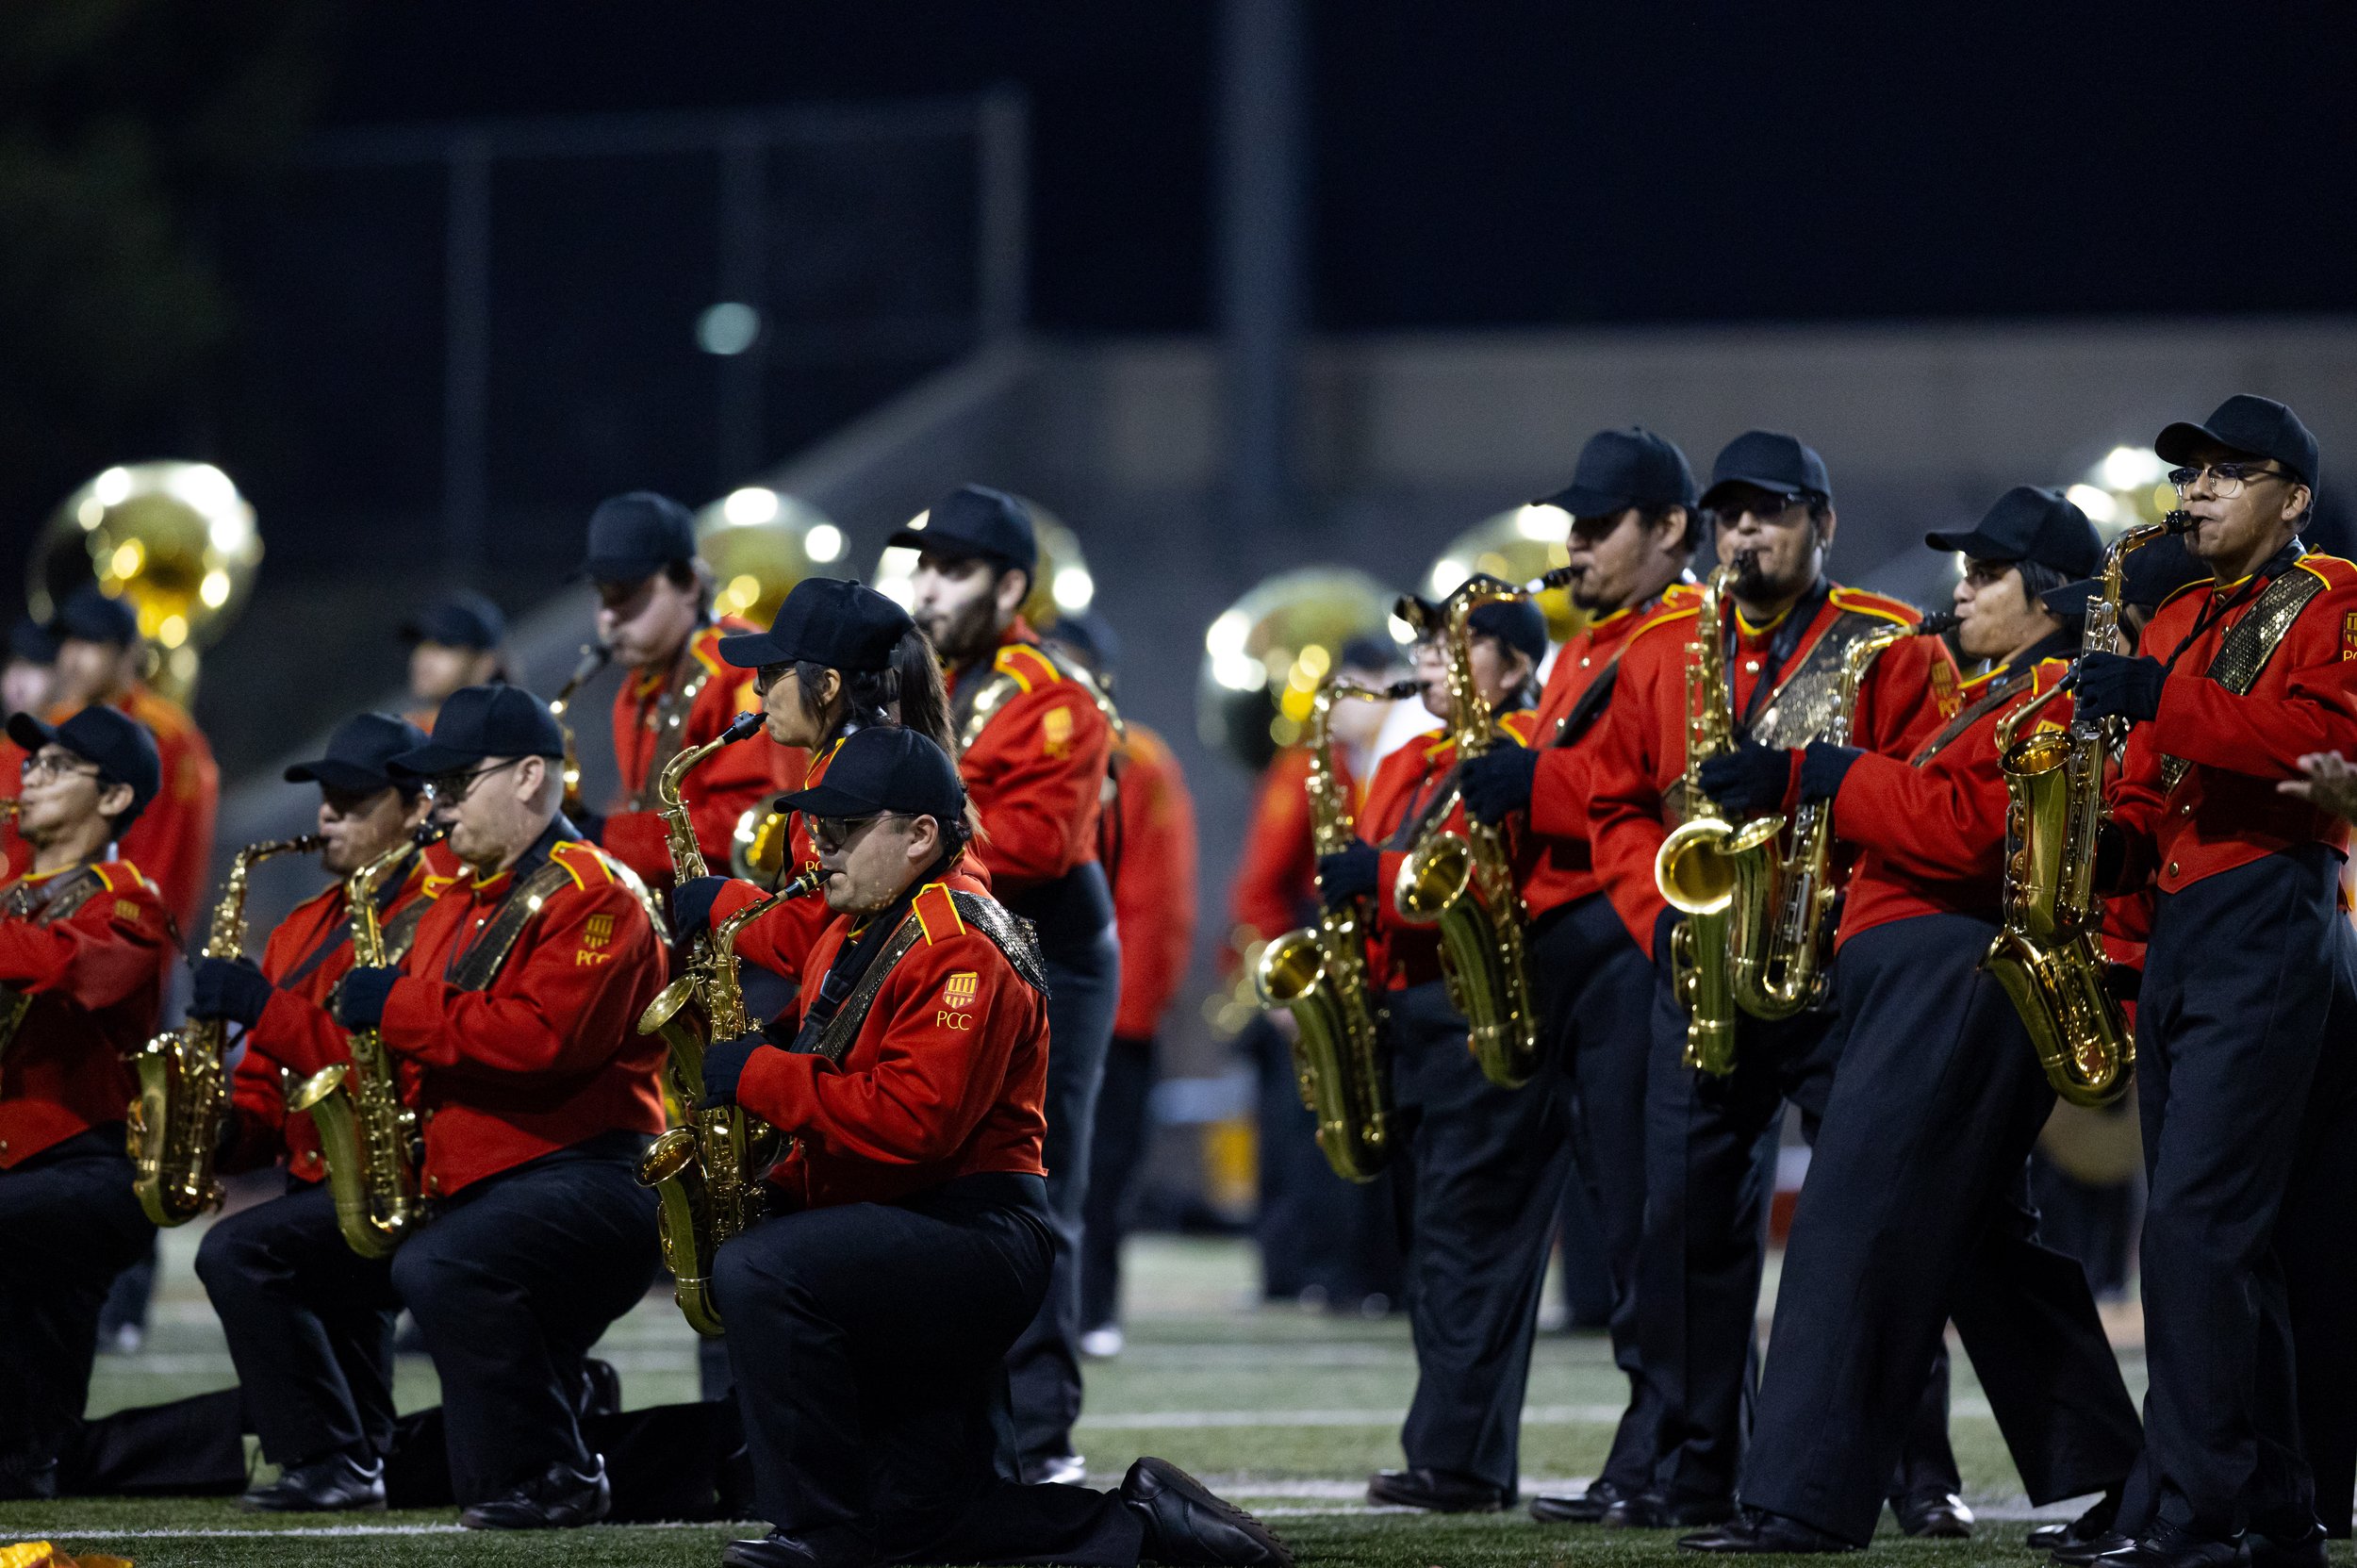  Paadena City College(PCC) marching band saxaphone section performing in the half-time show at Robinson Stadium in PCC campus on Saturday, Oct. 14 Walnut, Calif. (Danilo Perez | The Corsair) 